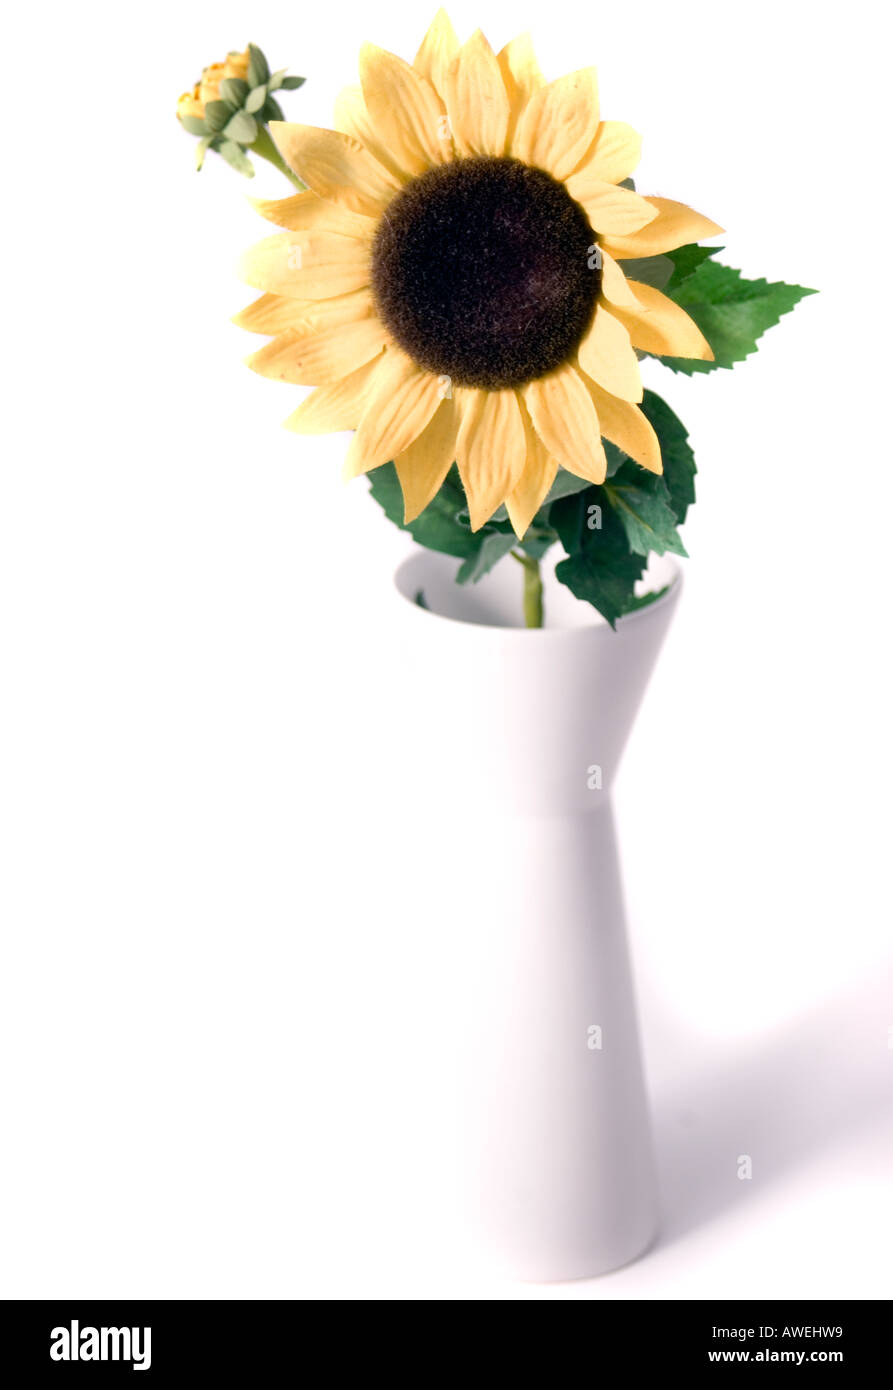 Close up of a Sunflower Stock Photo